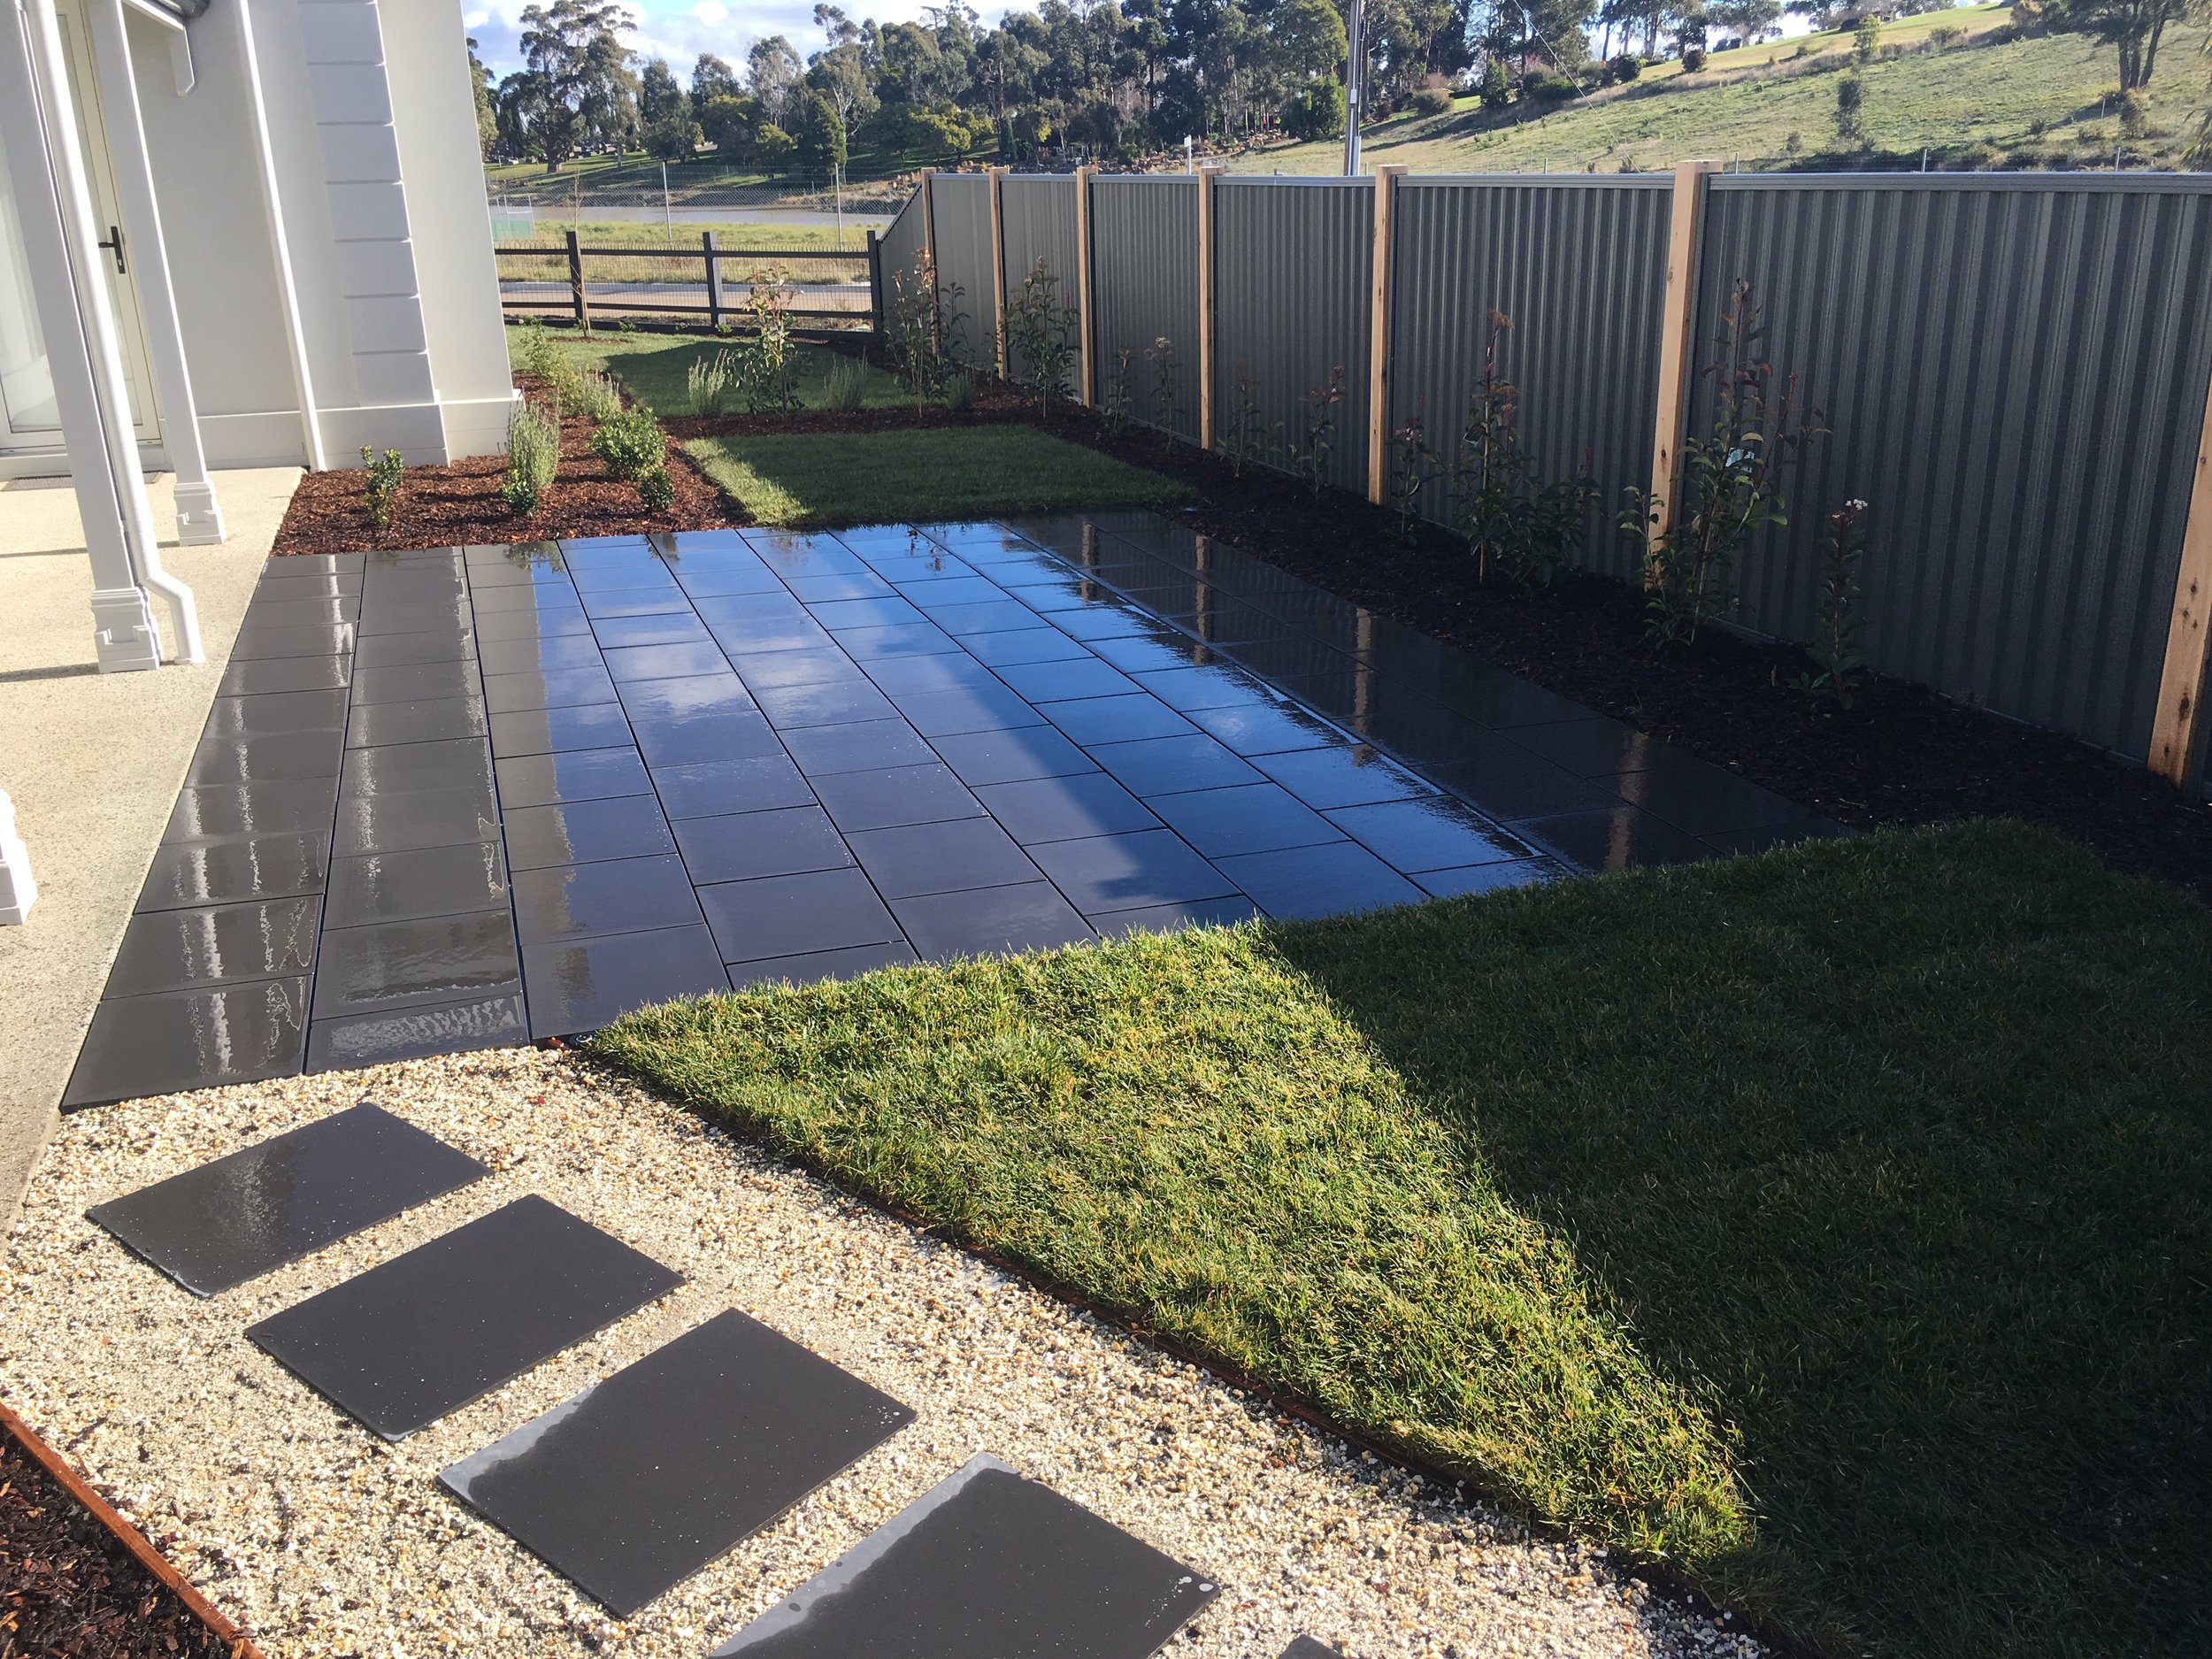 Stepping pavers with pebble infill, instant turf and paved area in stretcher bond style